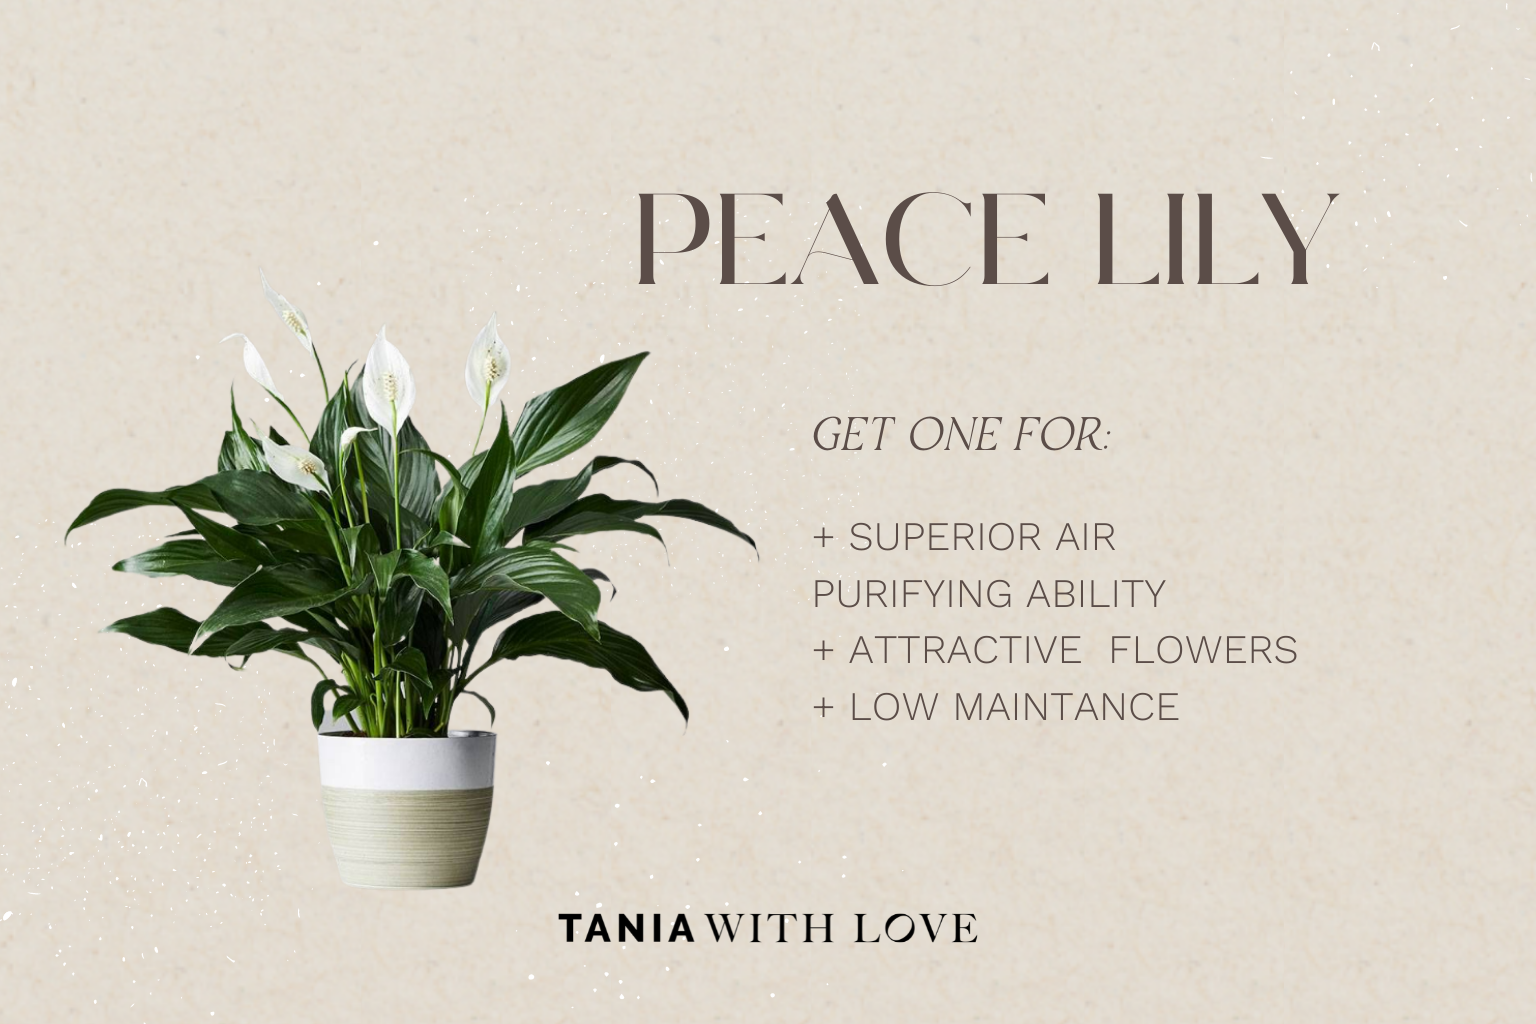 peace lily low maintenance plants that purify air